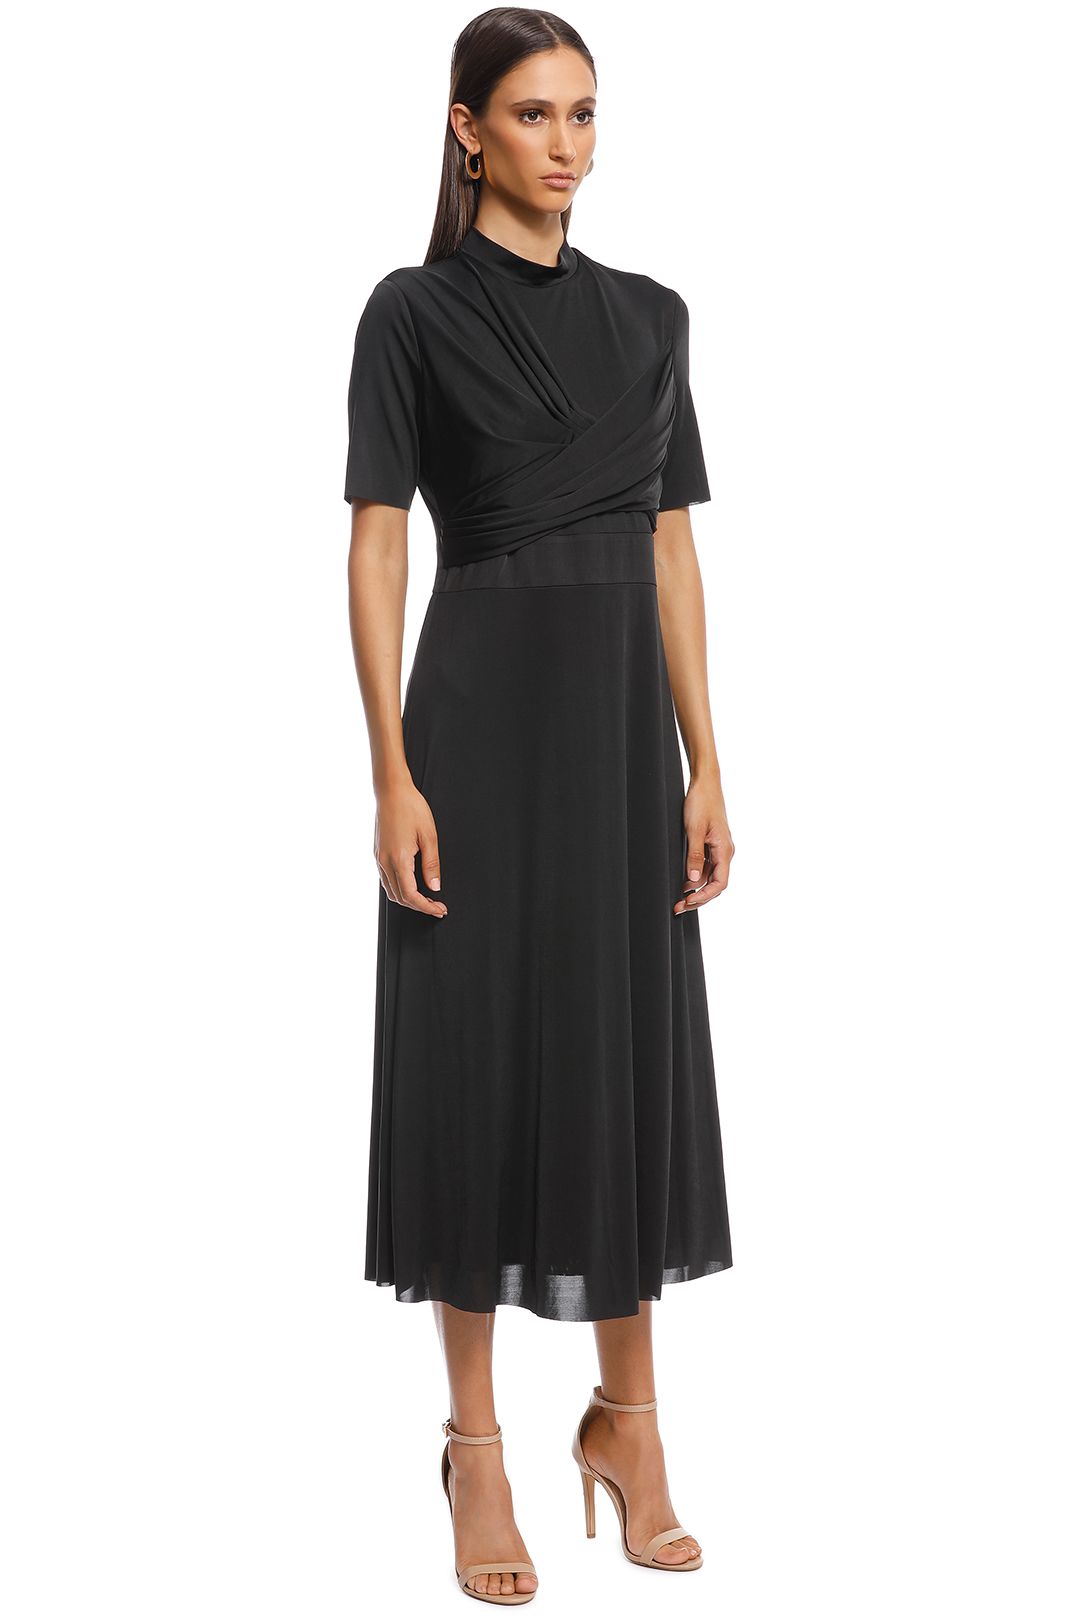 Camilla and Marc - Sequoia Slinky Dress - Black - Side